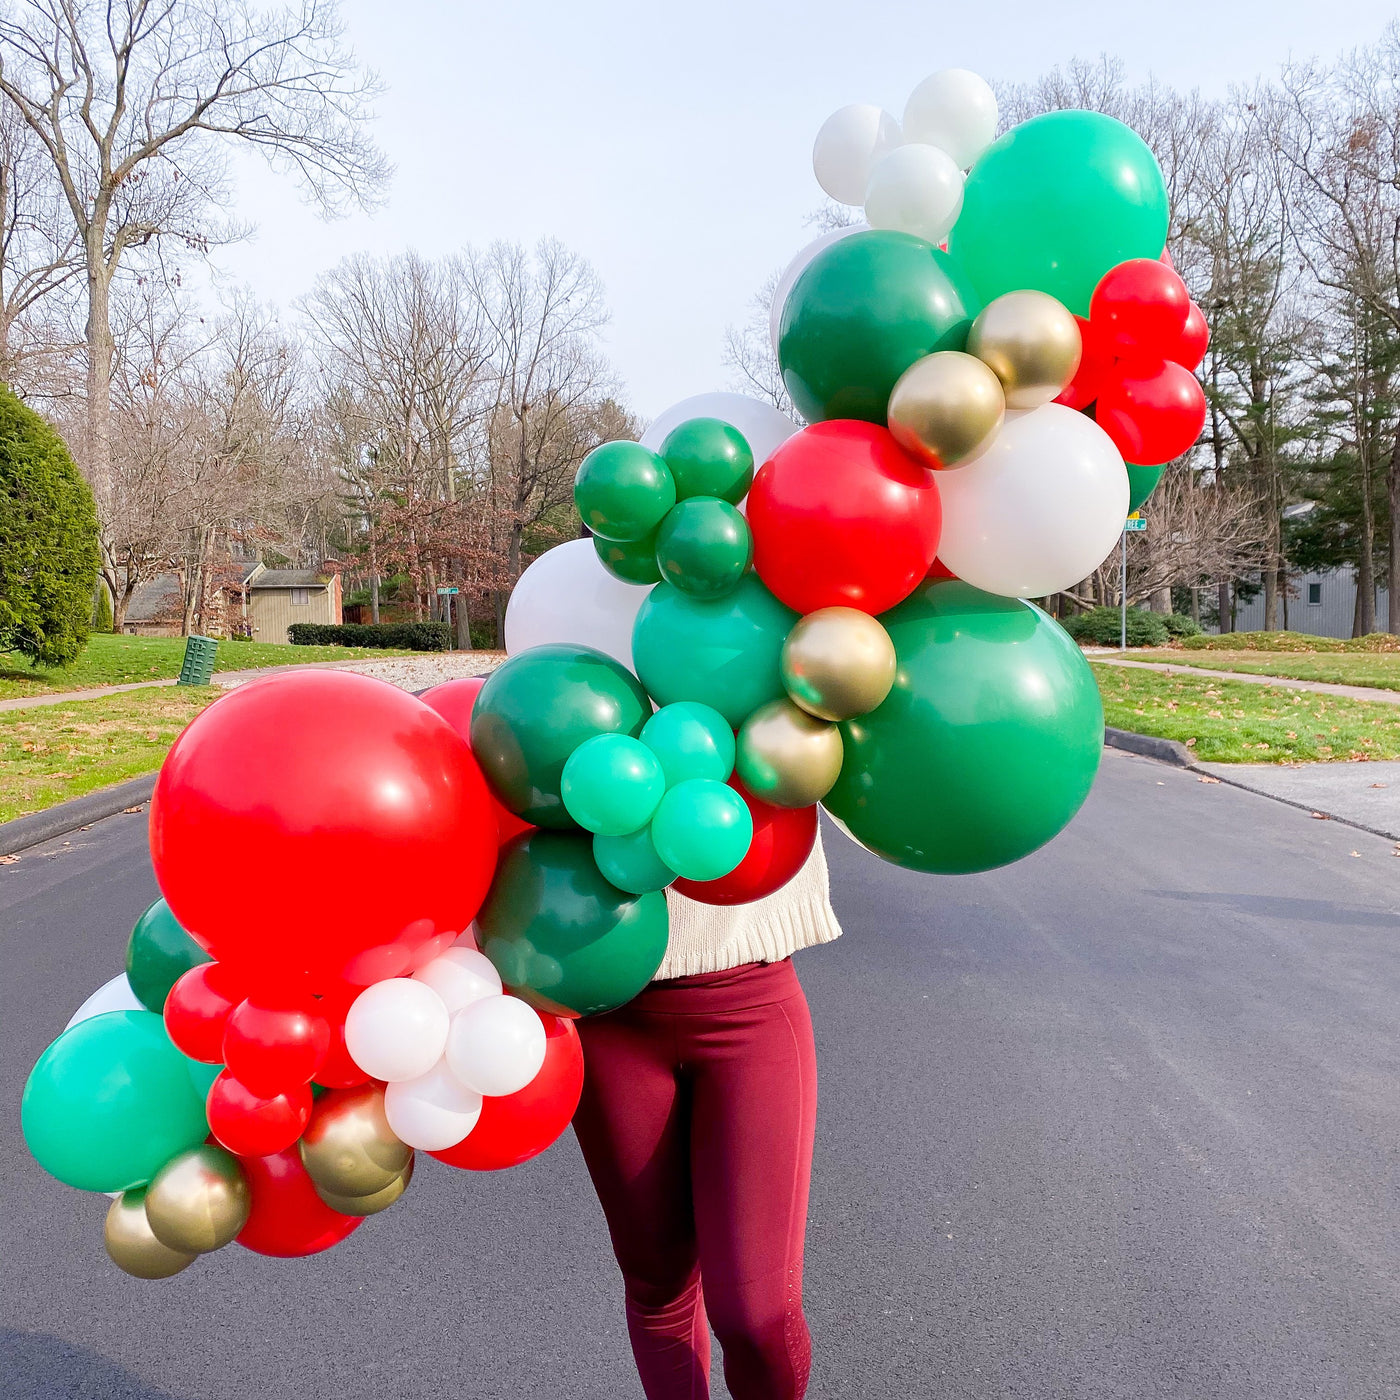 DIY Balloon Garland Kit in classic Christmas colors of red, white, green, and gold 